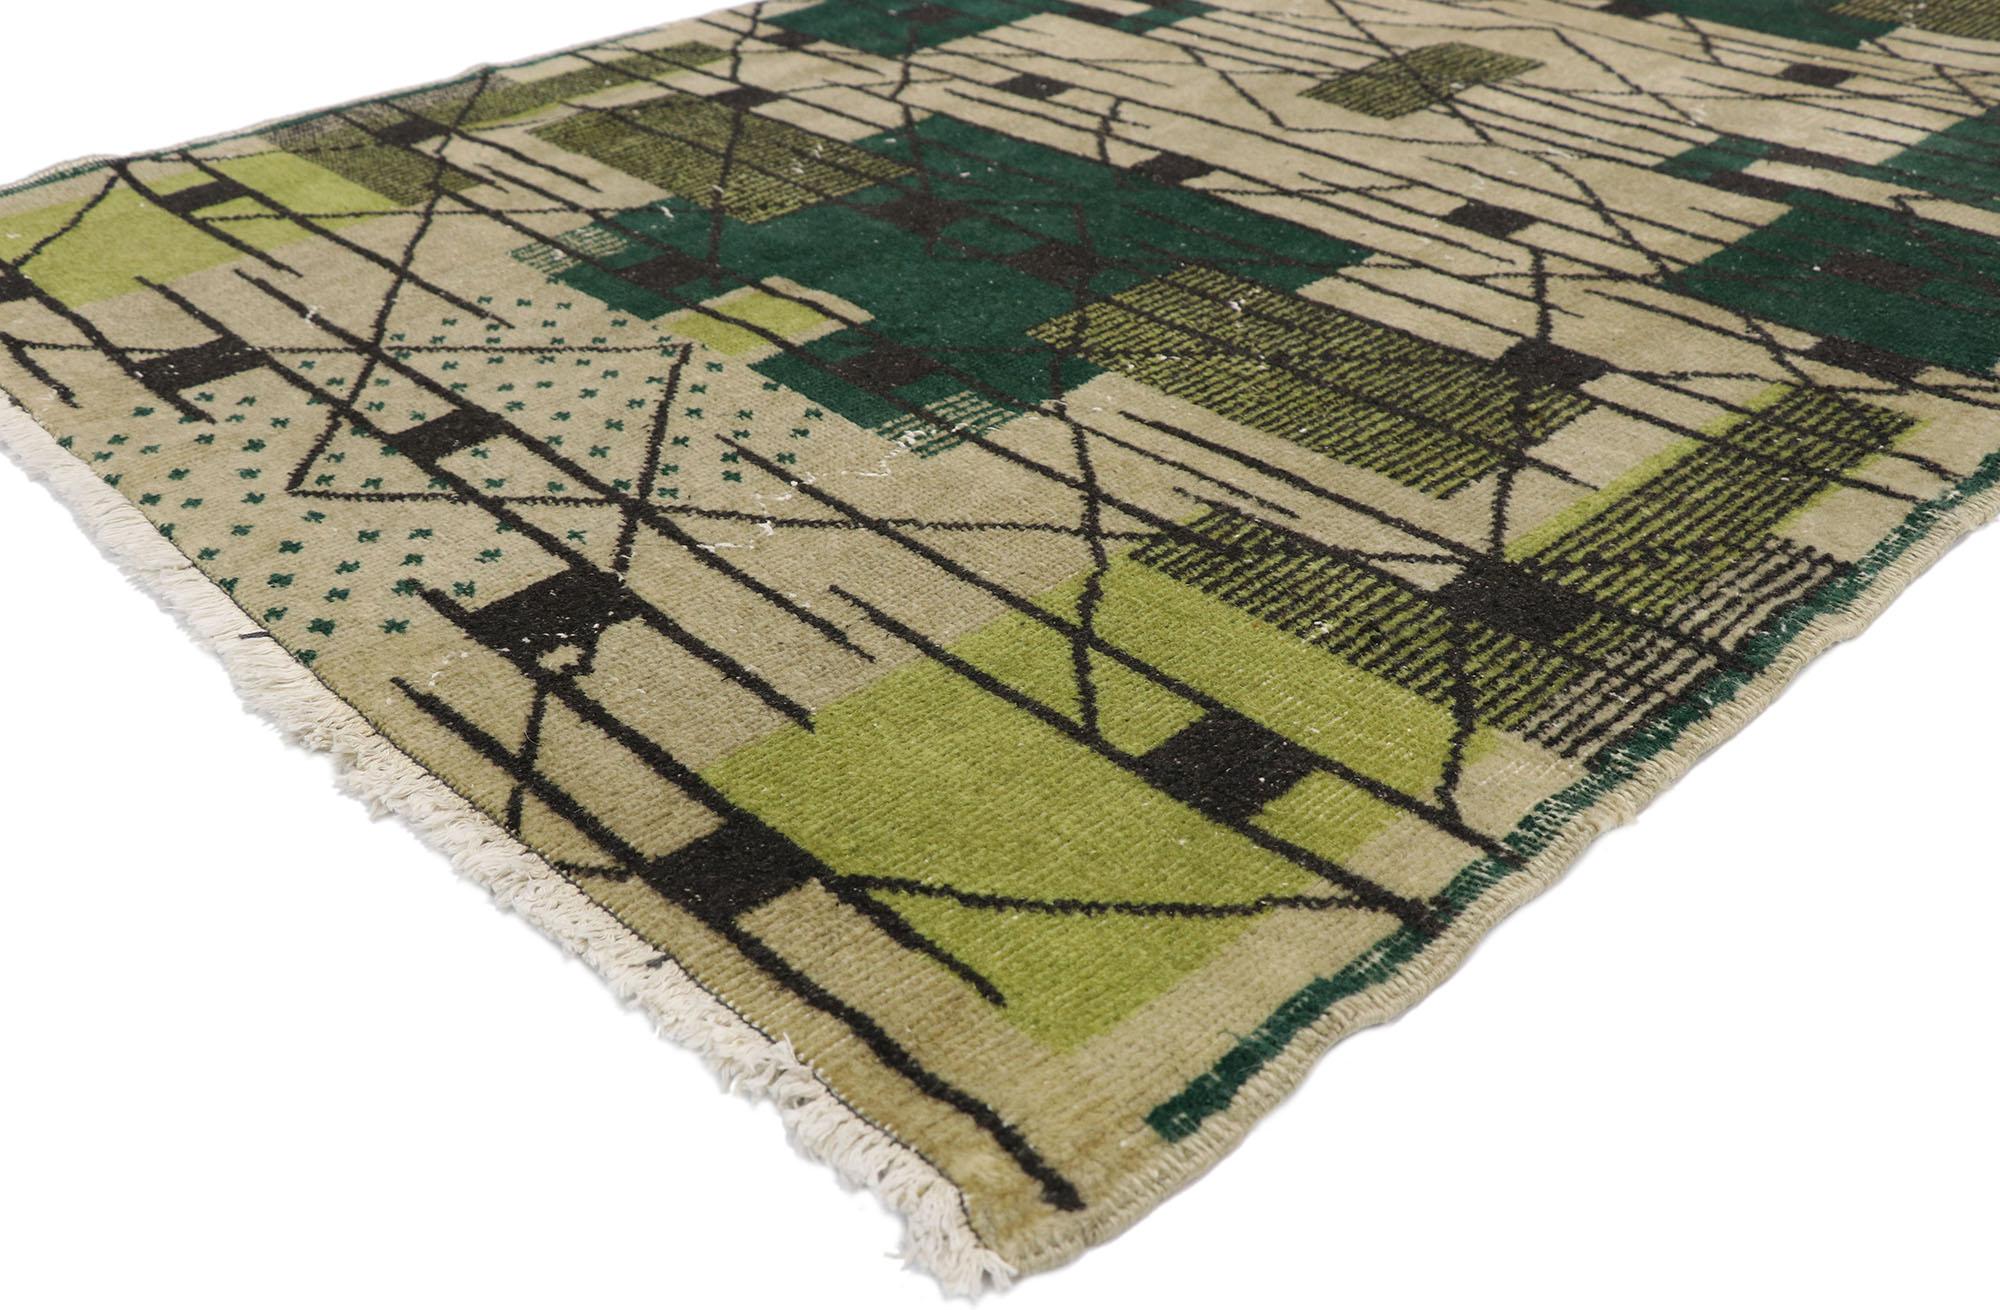 52578 Zeki Muren Vintage Sivas Rug with with De Stijl Mondrian Cubist Art Deco Style. Displaying balanced symmetry and bold geometric shapes combined with a lovingly time-worn composition, this hand knotted wool Zeki Muren distressed vintage Turkish